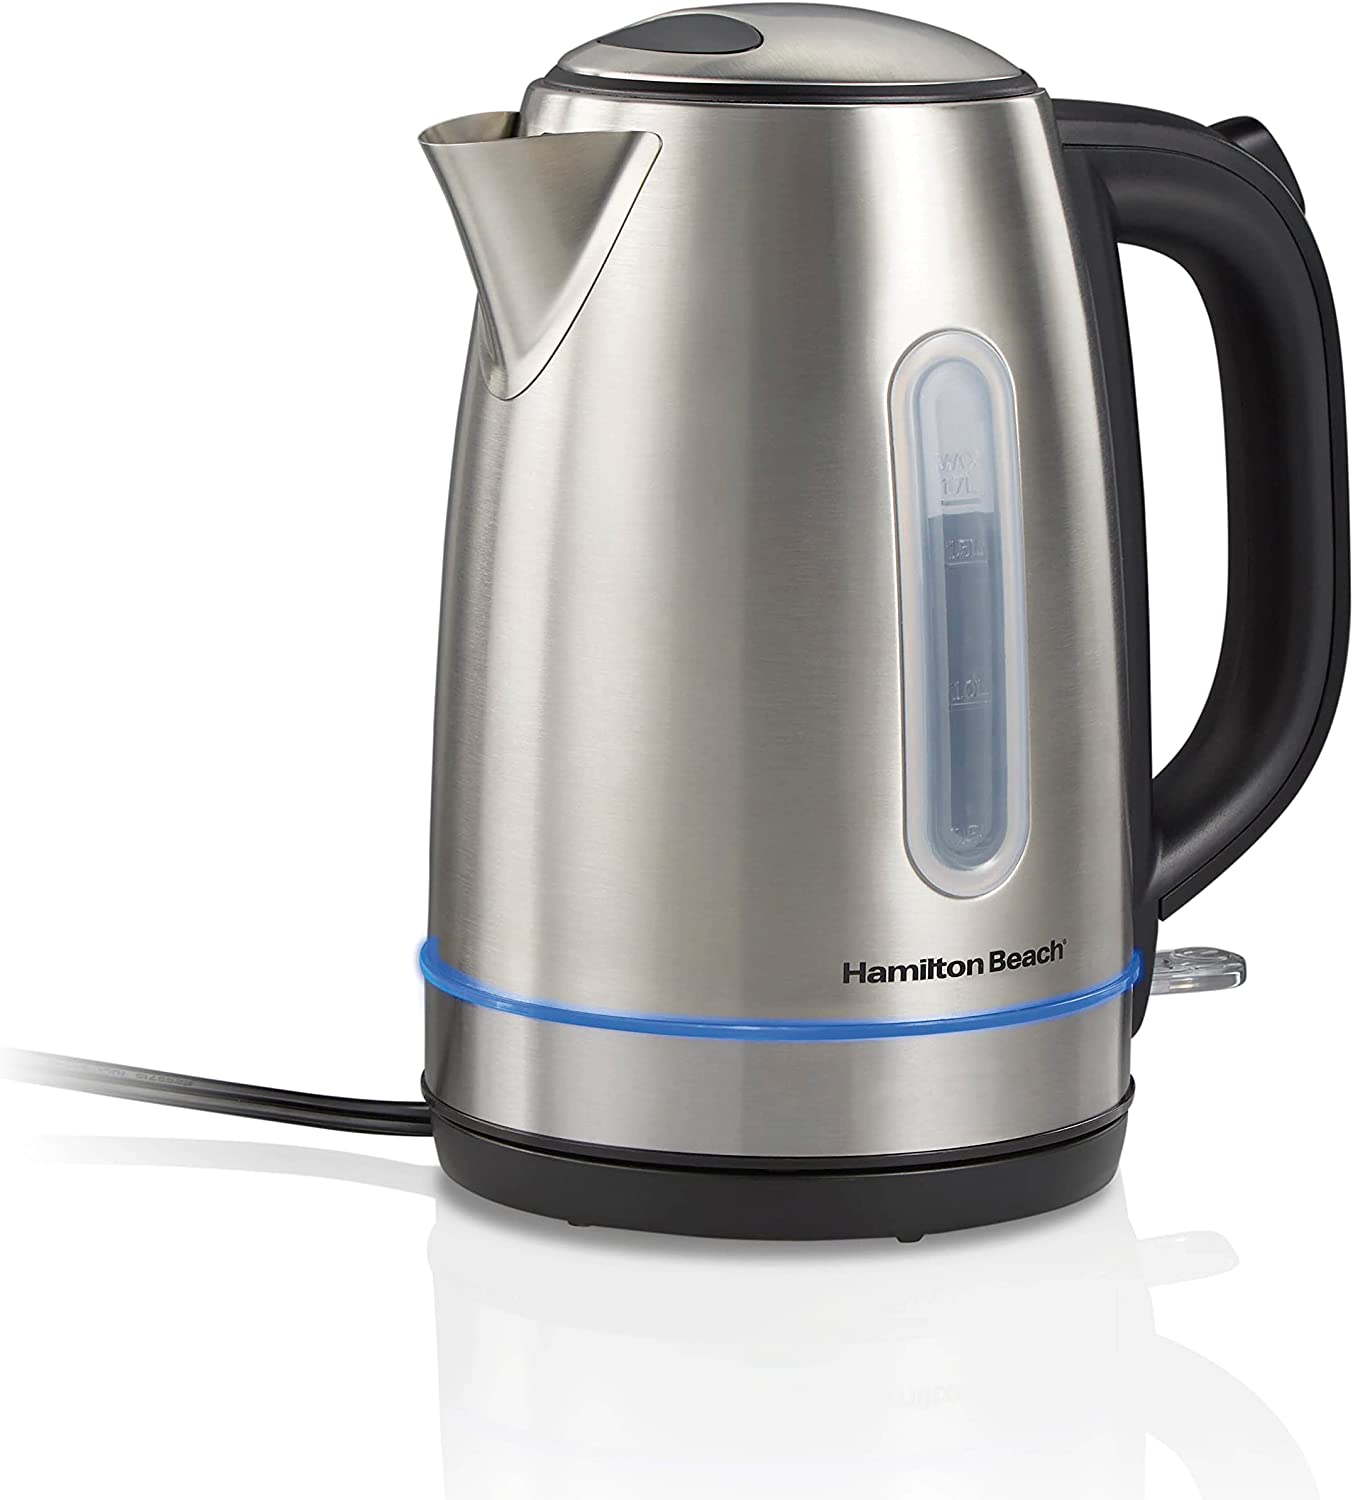 https://bigbigmart.com/wp-content/uploads/2023/07/Hamilton-Beach-Electric-Tea-Kettle-Water-Boiler-Heater-1.7-Liter-Cordless-Serving-1500-Watts-for-Fast-Boiling-Auto-Shutoff-and-Boil-Dry-Protection-Stainless-Steel-with-LED-Light-Ring-41037.jpg